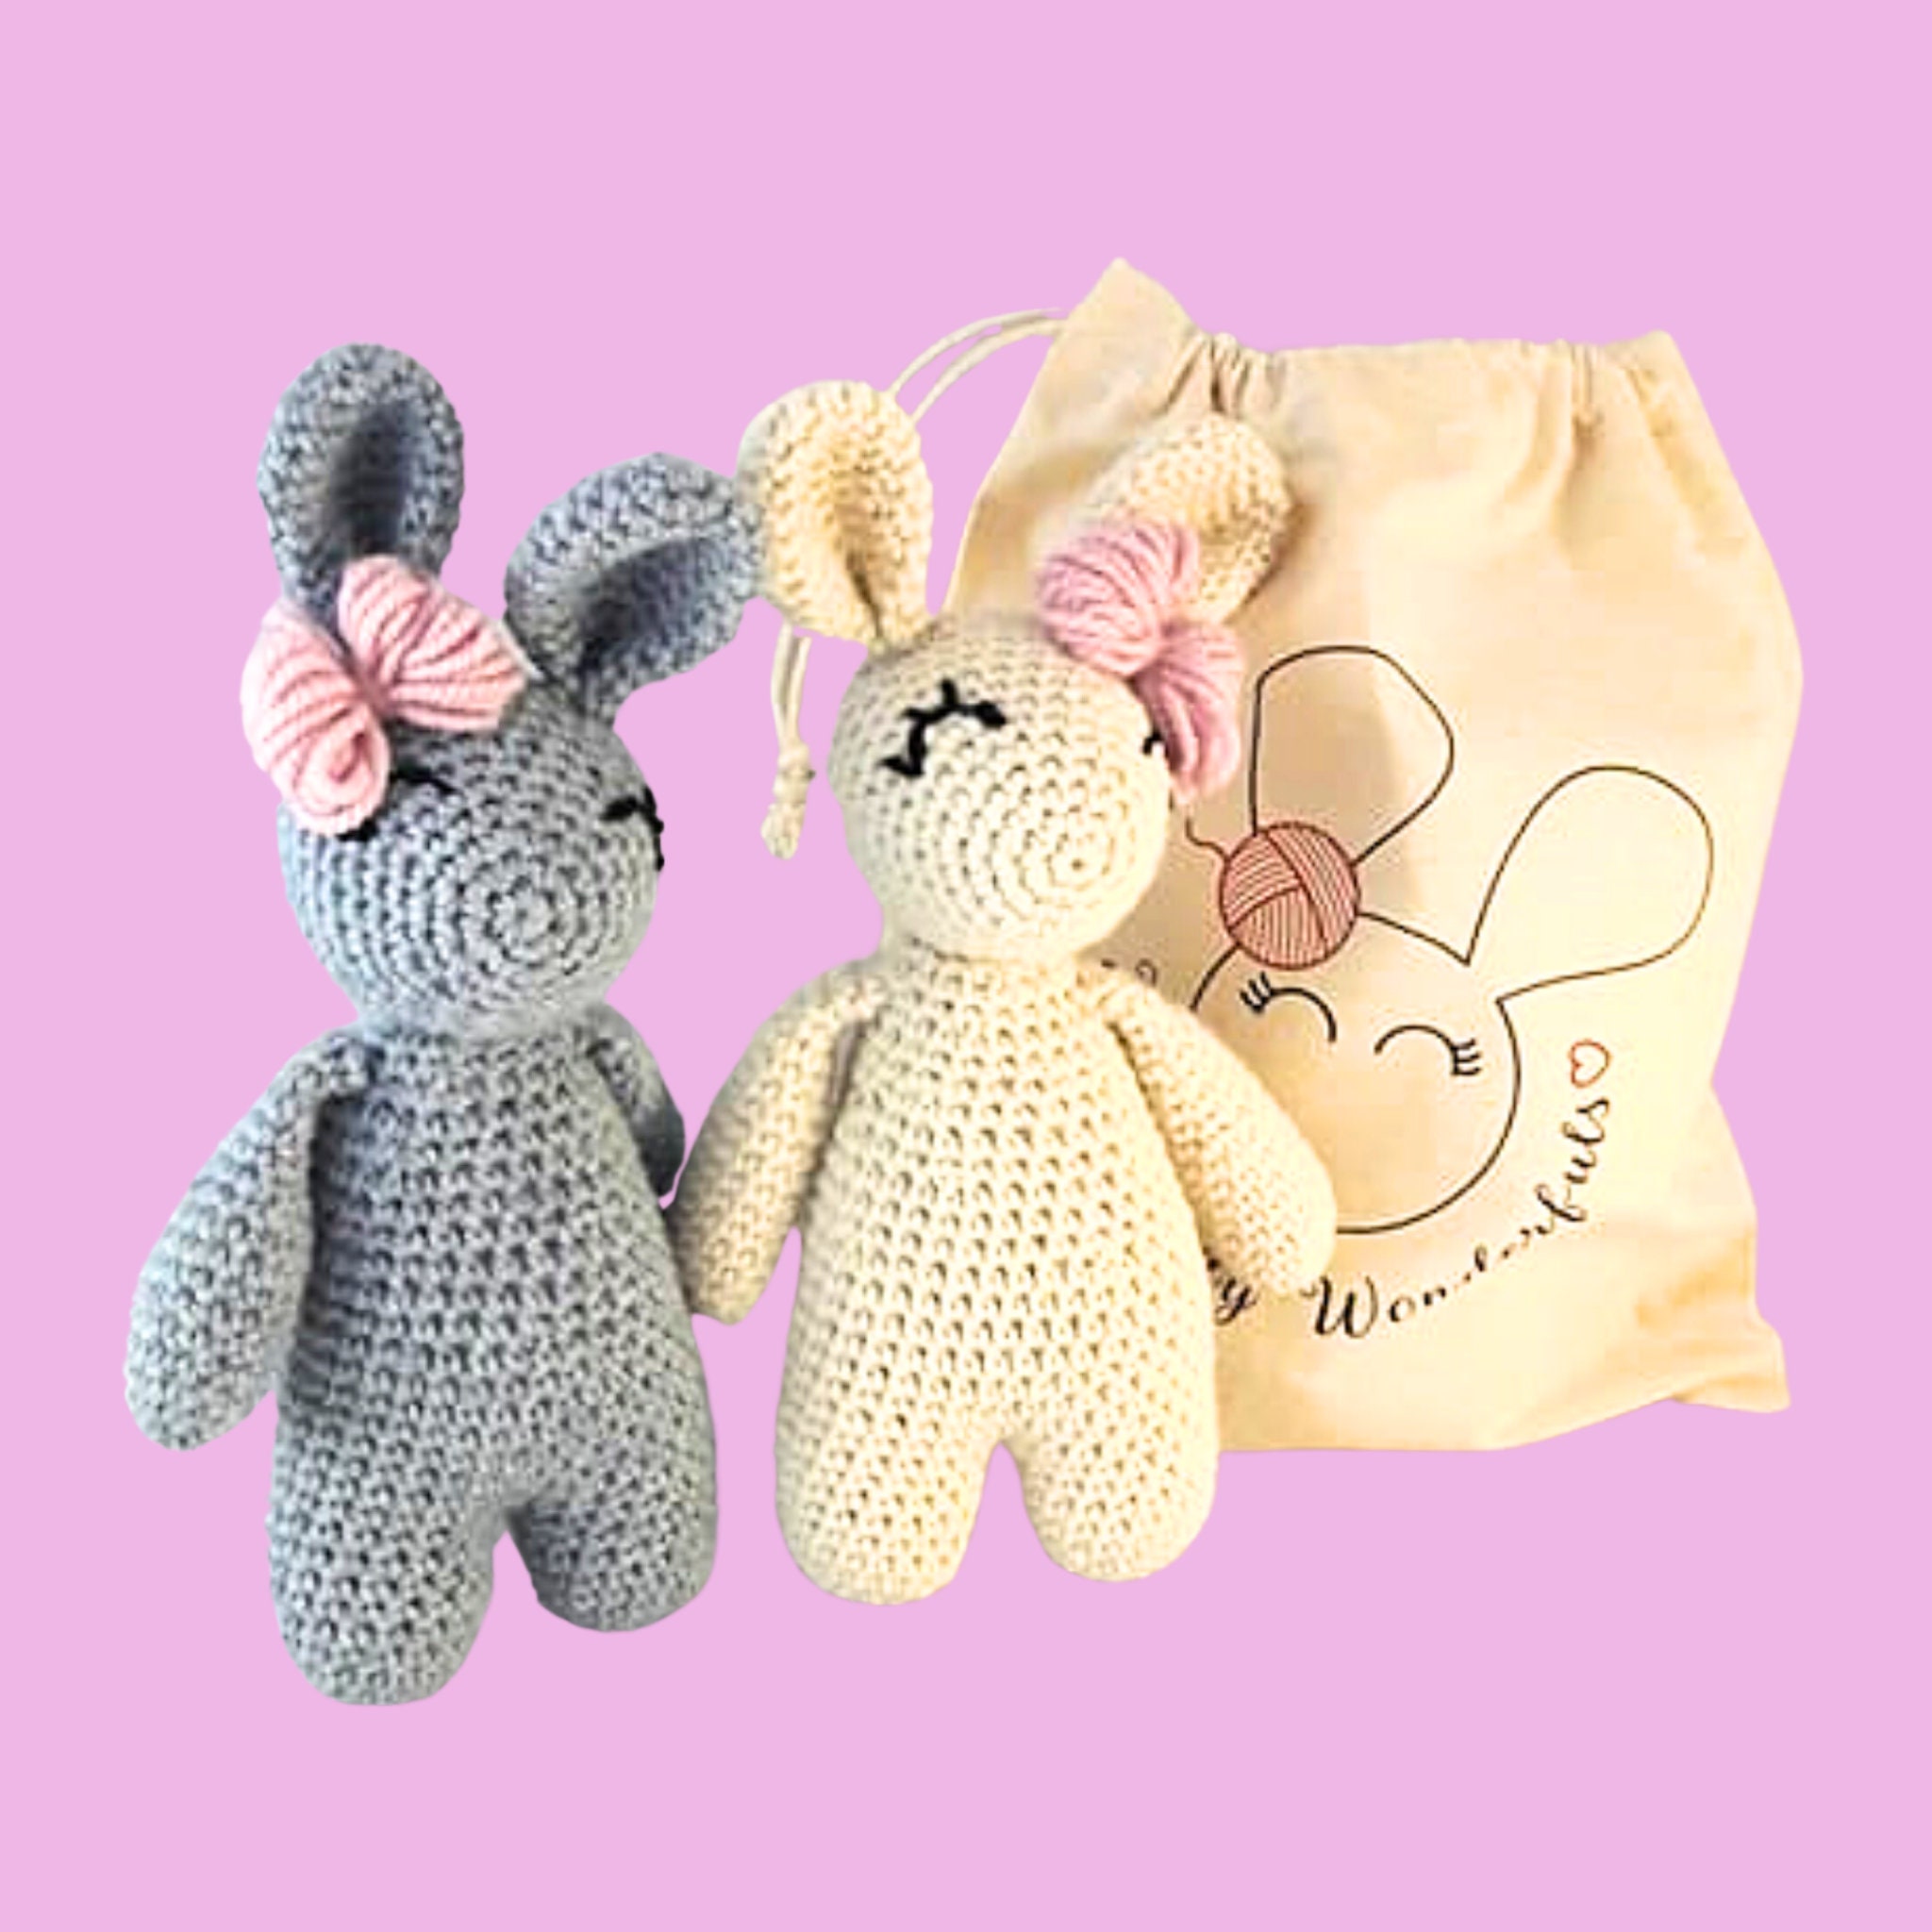 Cute Rabbit Stuffed Animal Beginner Crochet Kit,Crochet Animal Kit, with  Complete Instructional Video and Paper Step-by-Step Instructions, DIY Craft